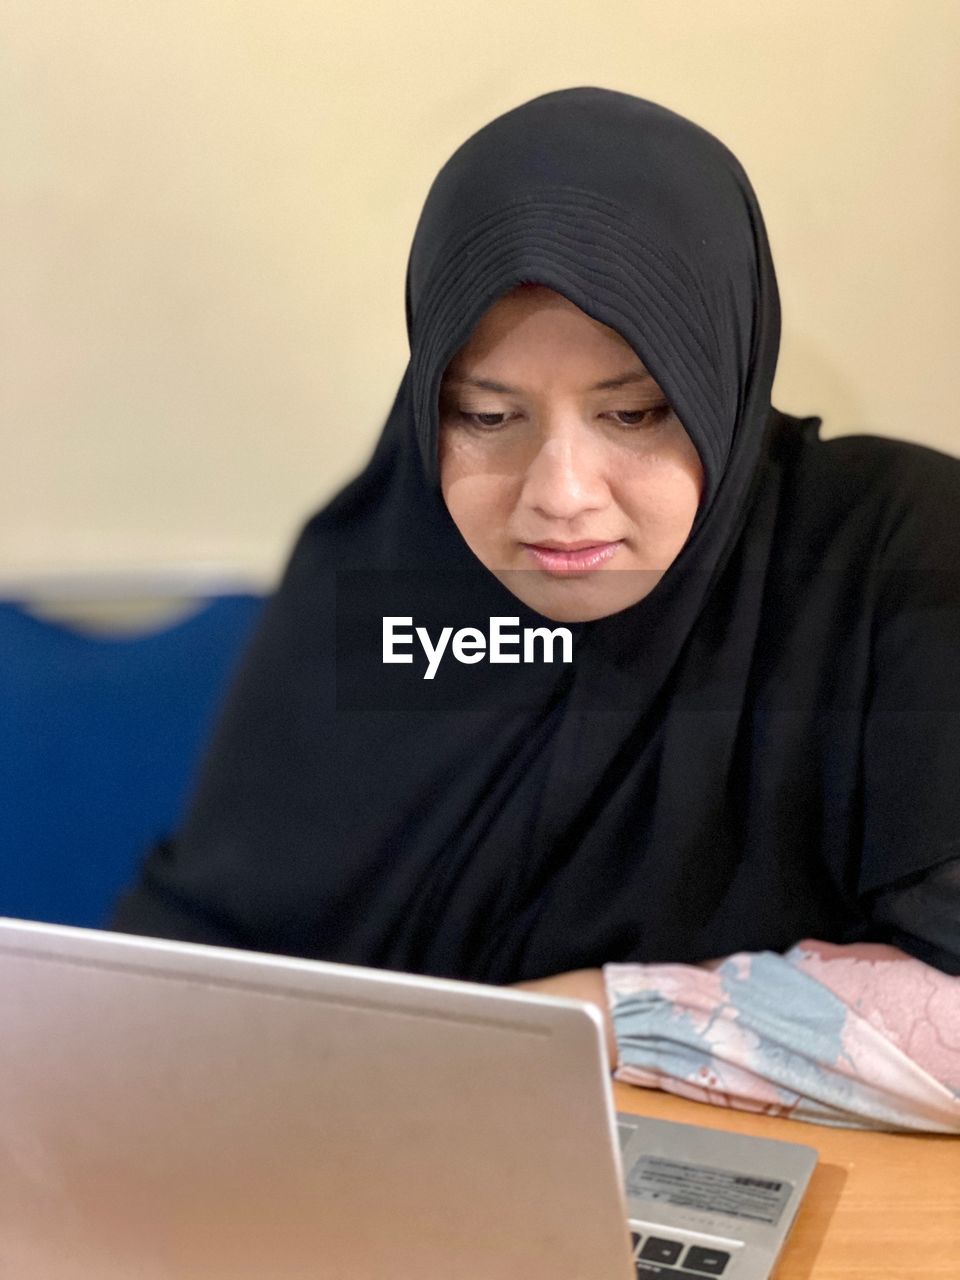 MID ADULT WOMAN USING MOBILE PHONE IN LAPTOP